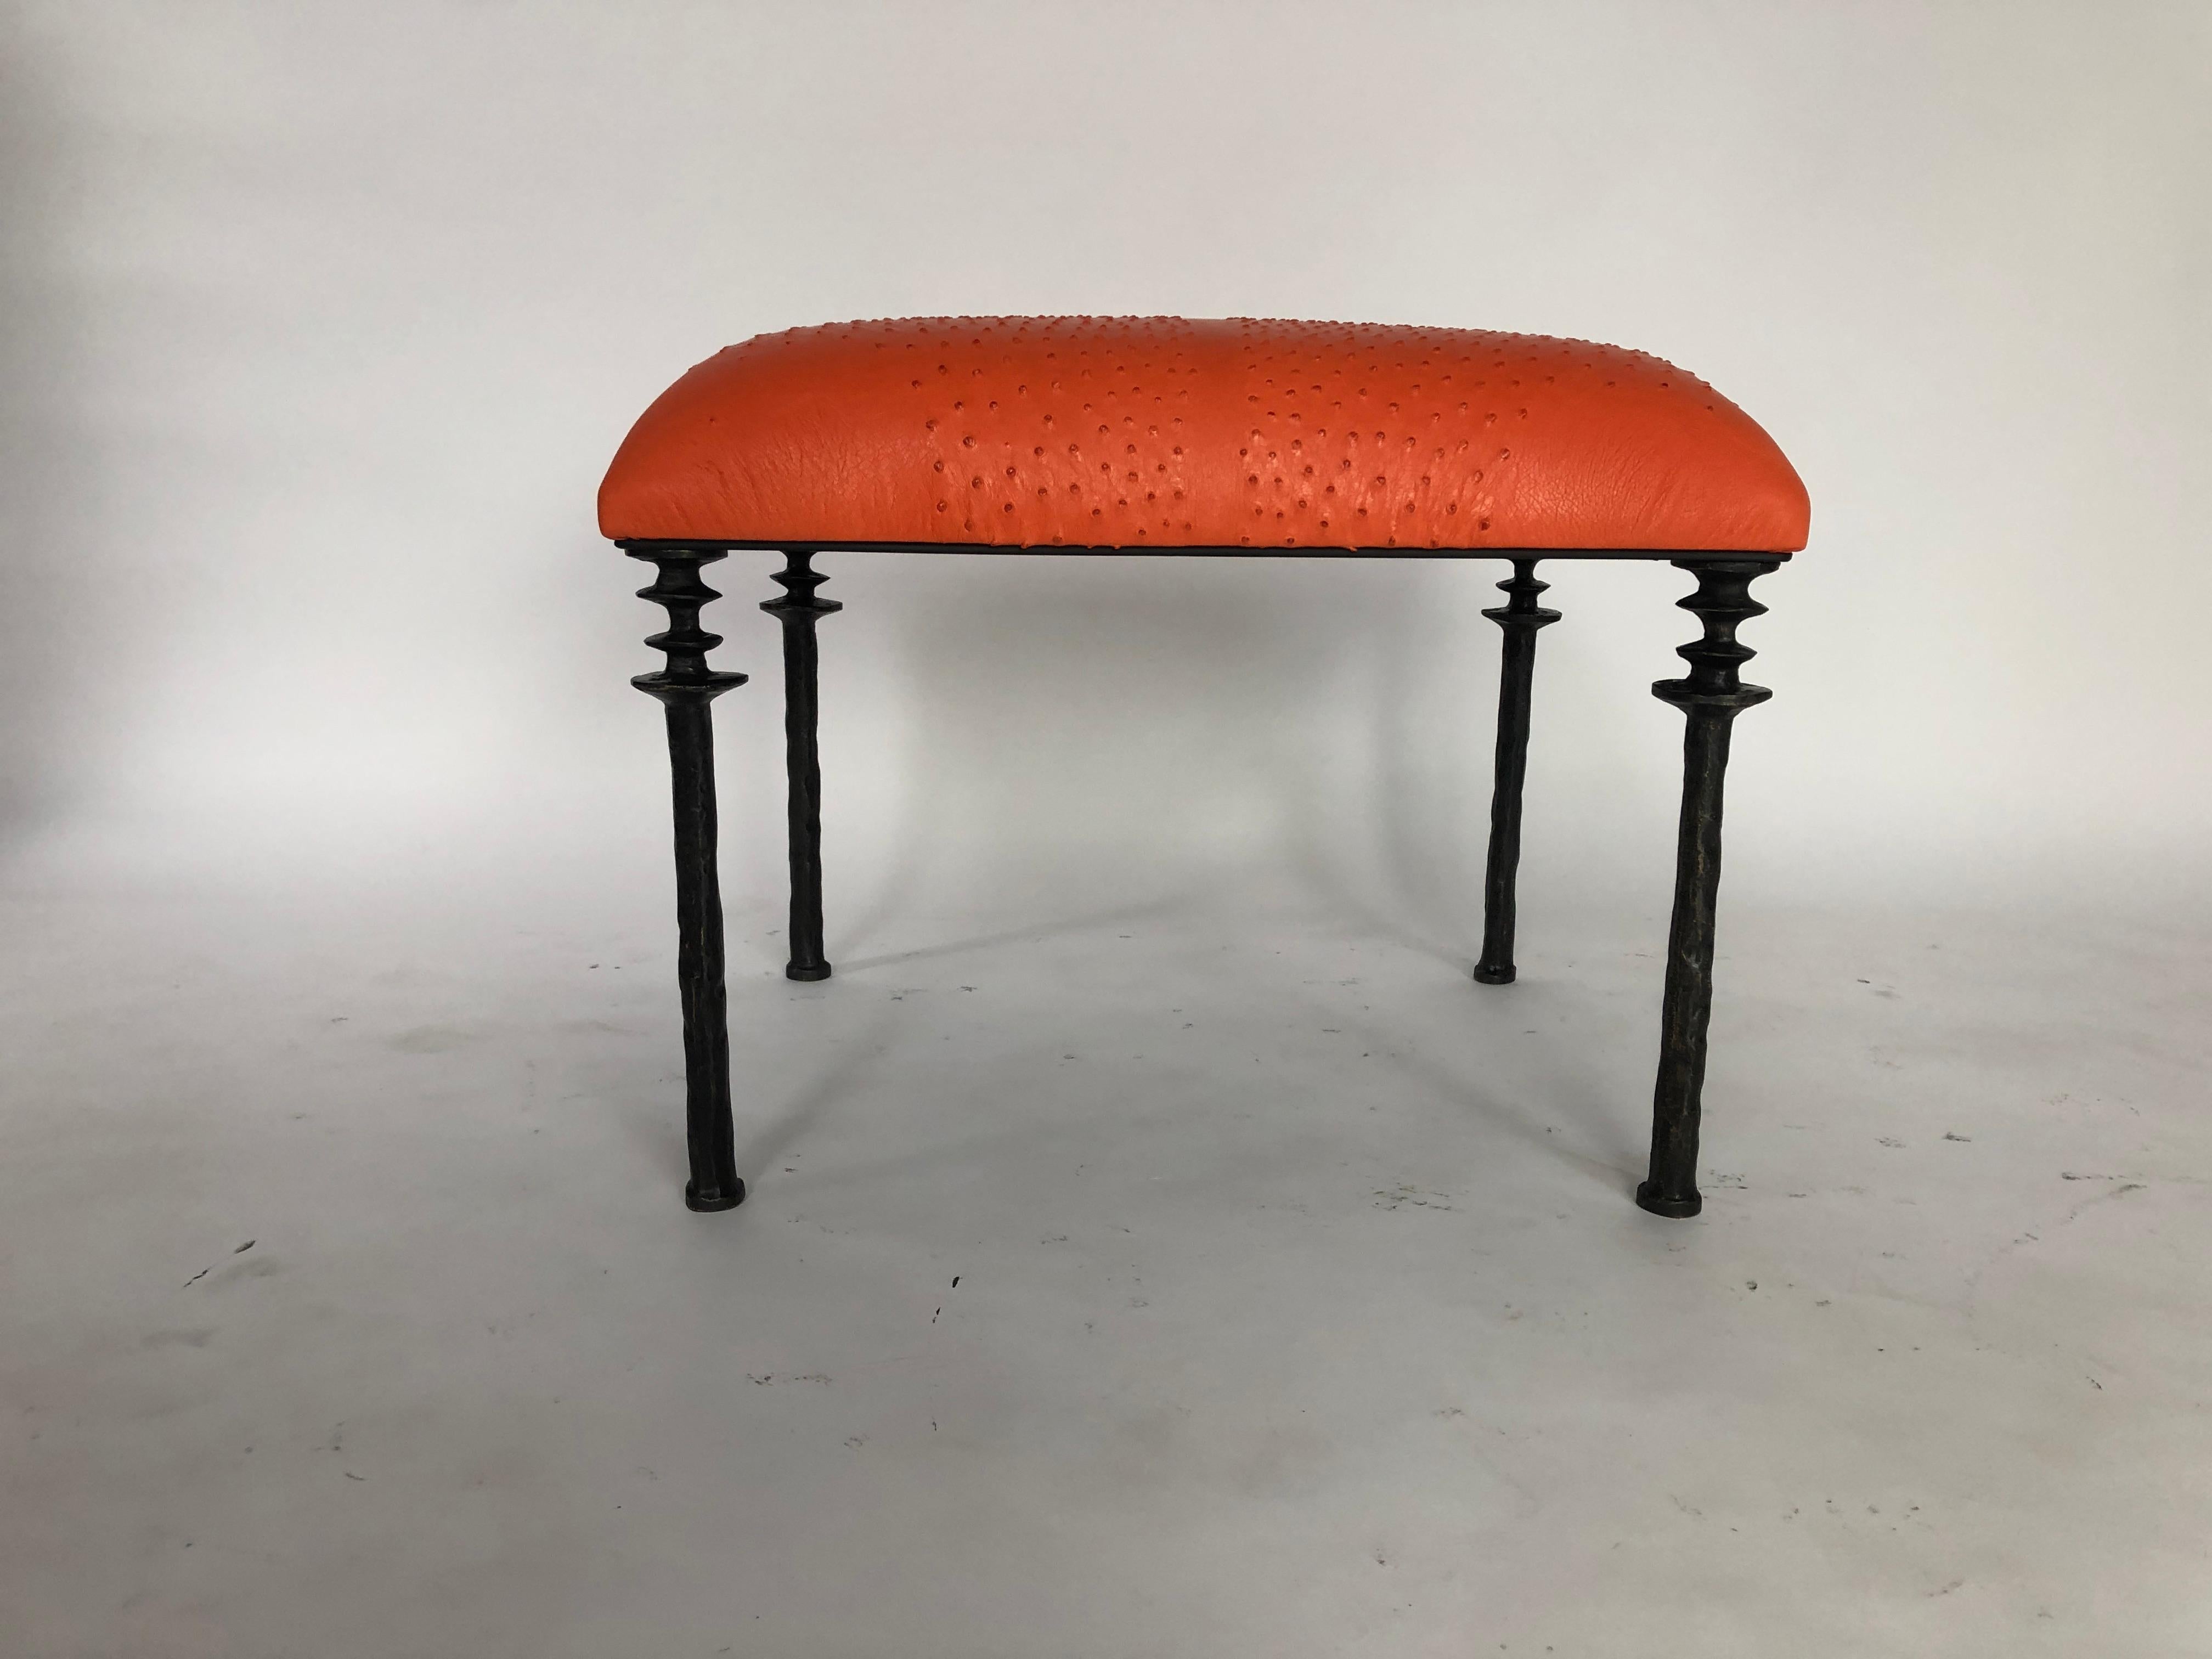 Bronze Pair of Sorgue Stools, by Bourgeois Boheme Atelier, Tangerine Ostrich Leather